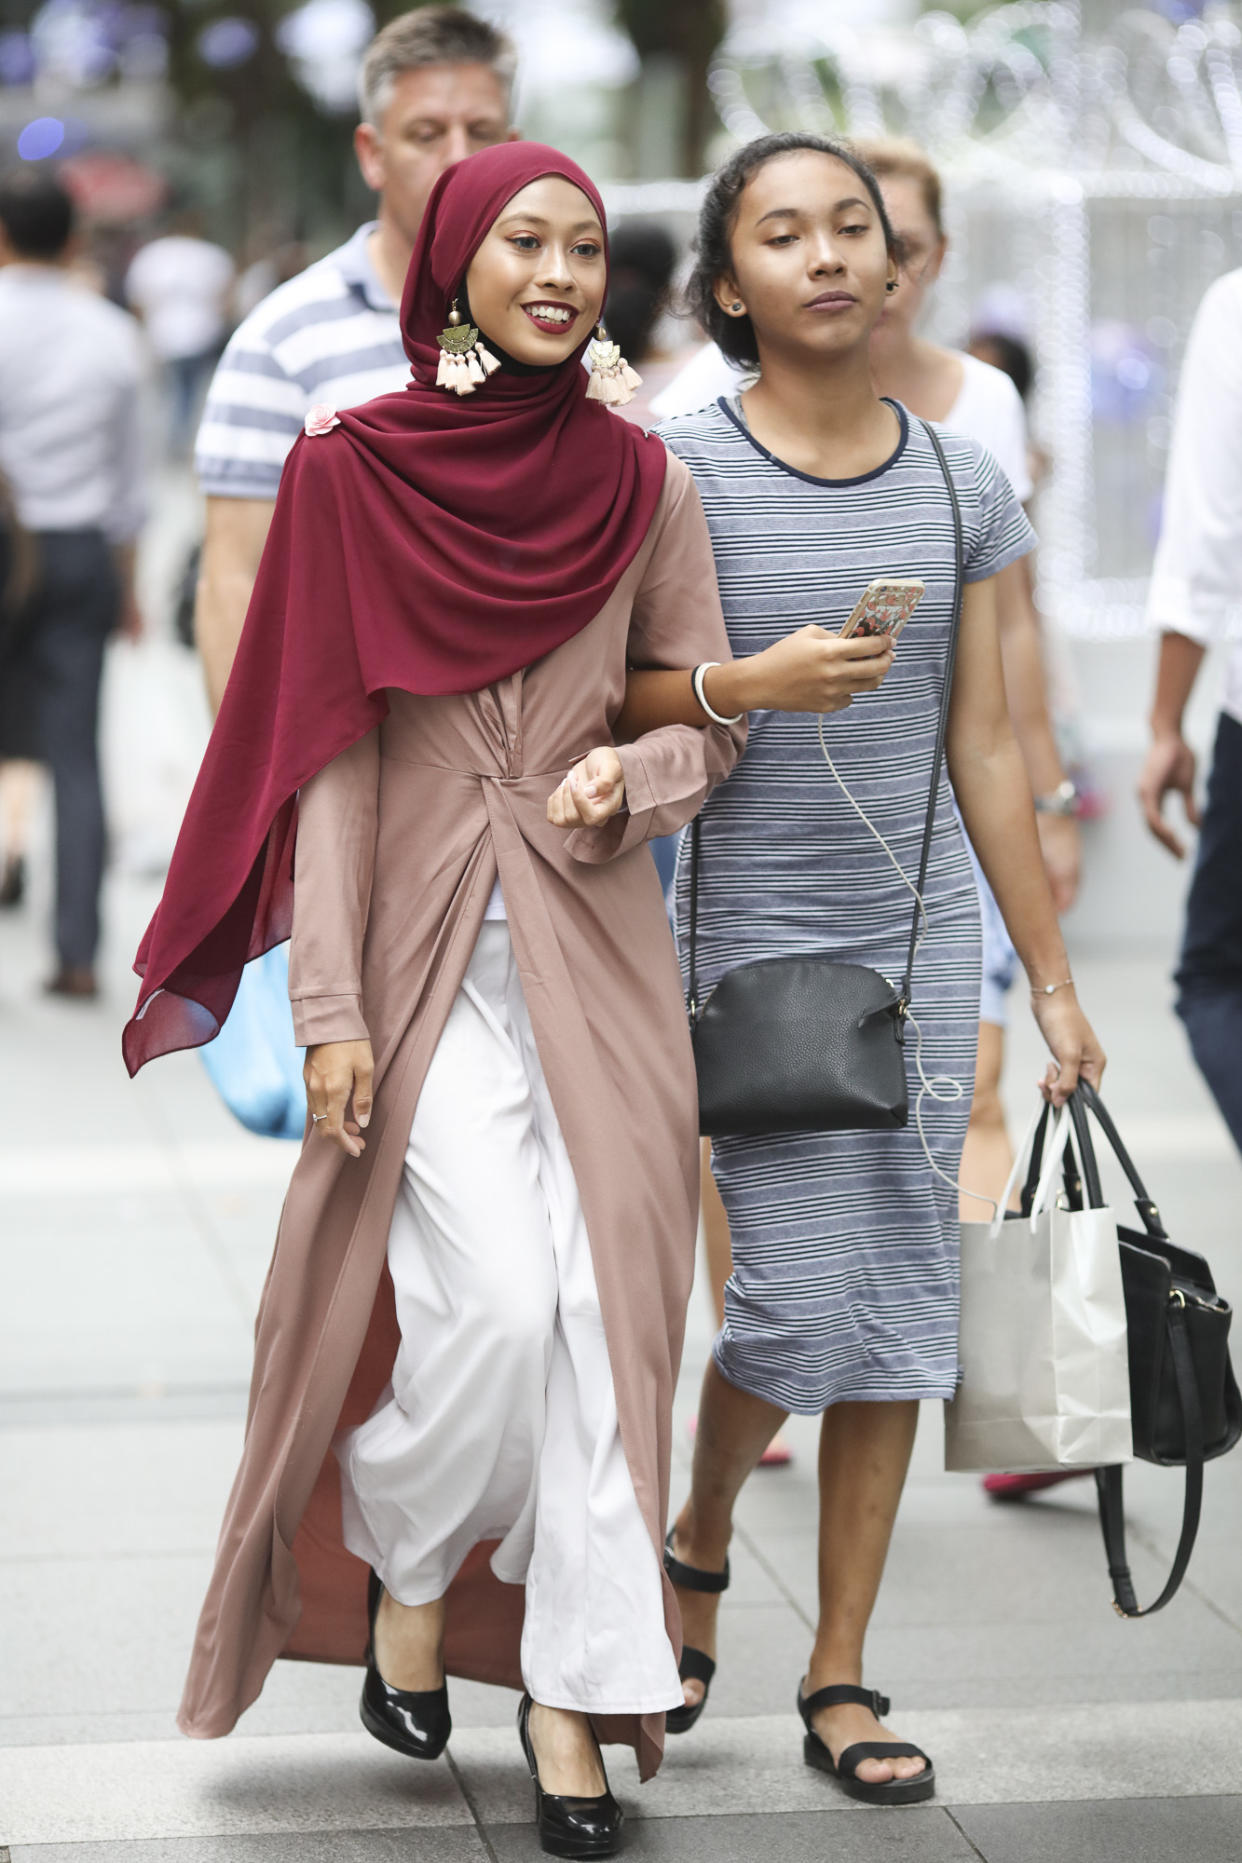 Flowy and soft silhouettes are the go-to look for modest fashion in Singapore. (Photo: Don Wong)